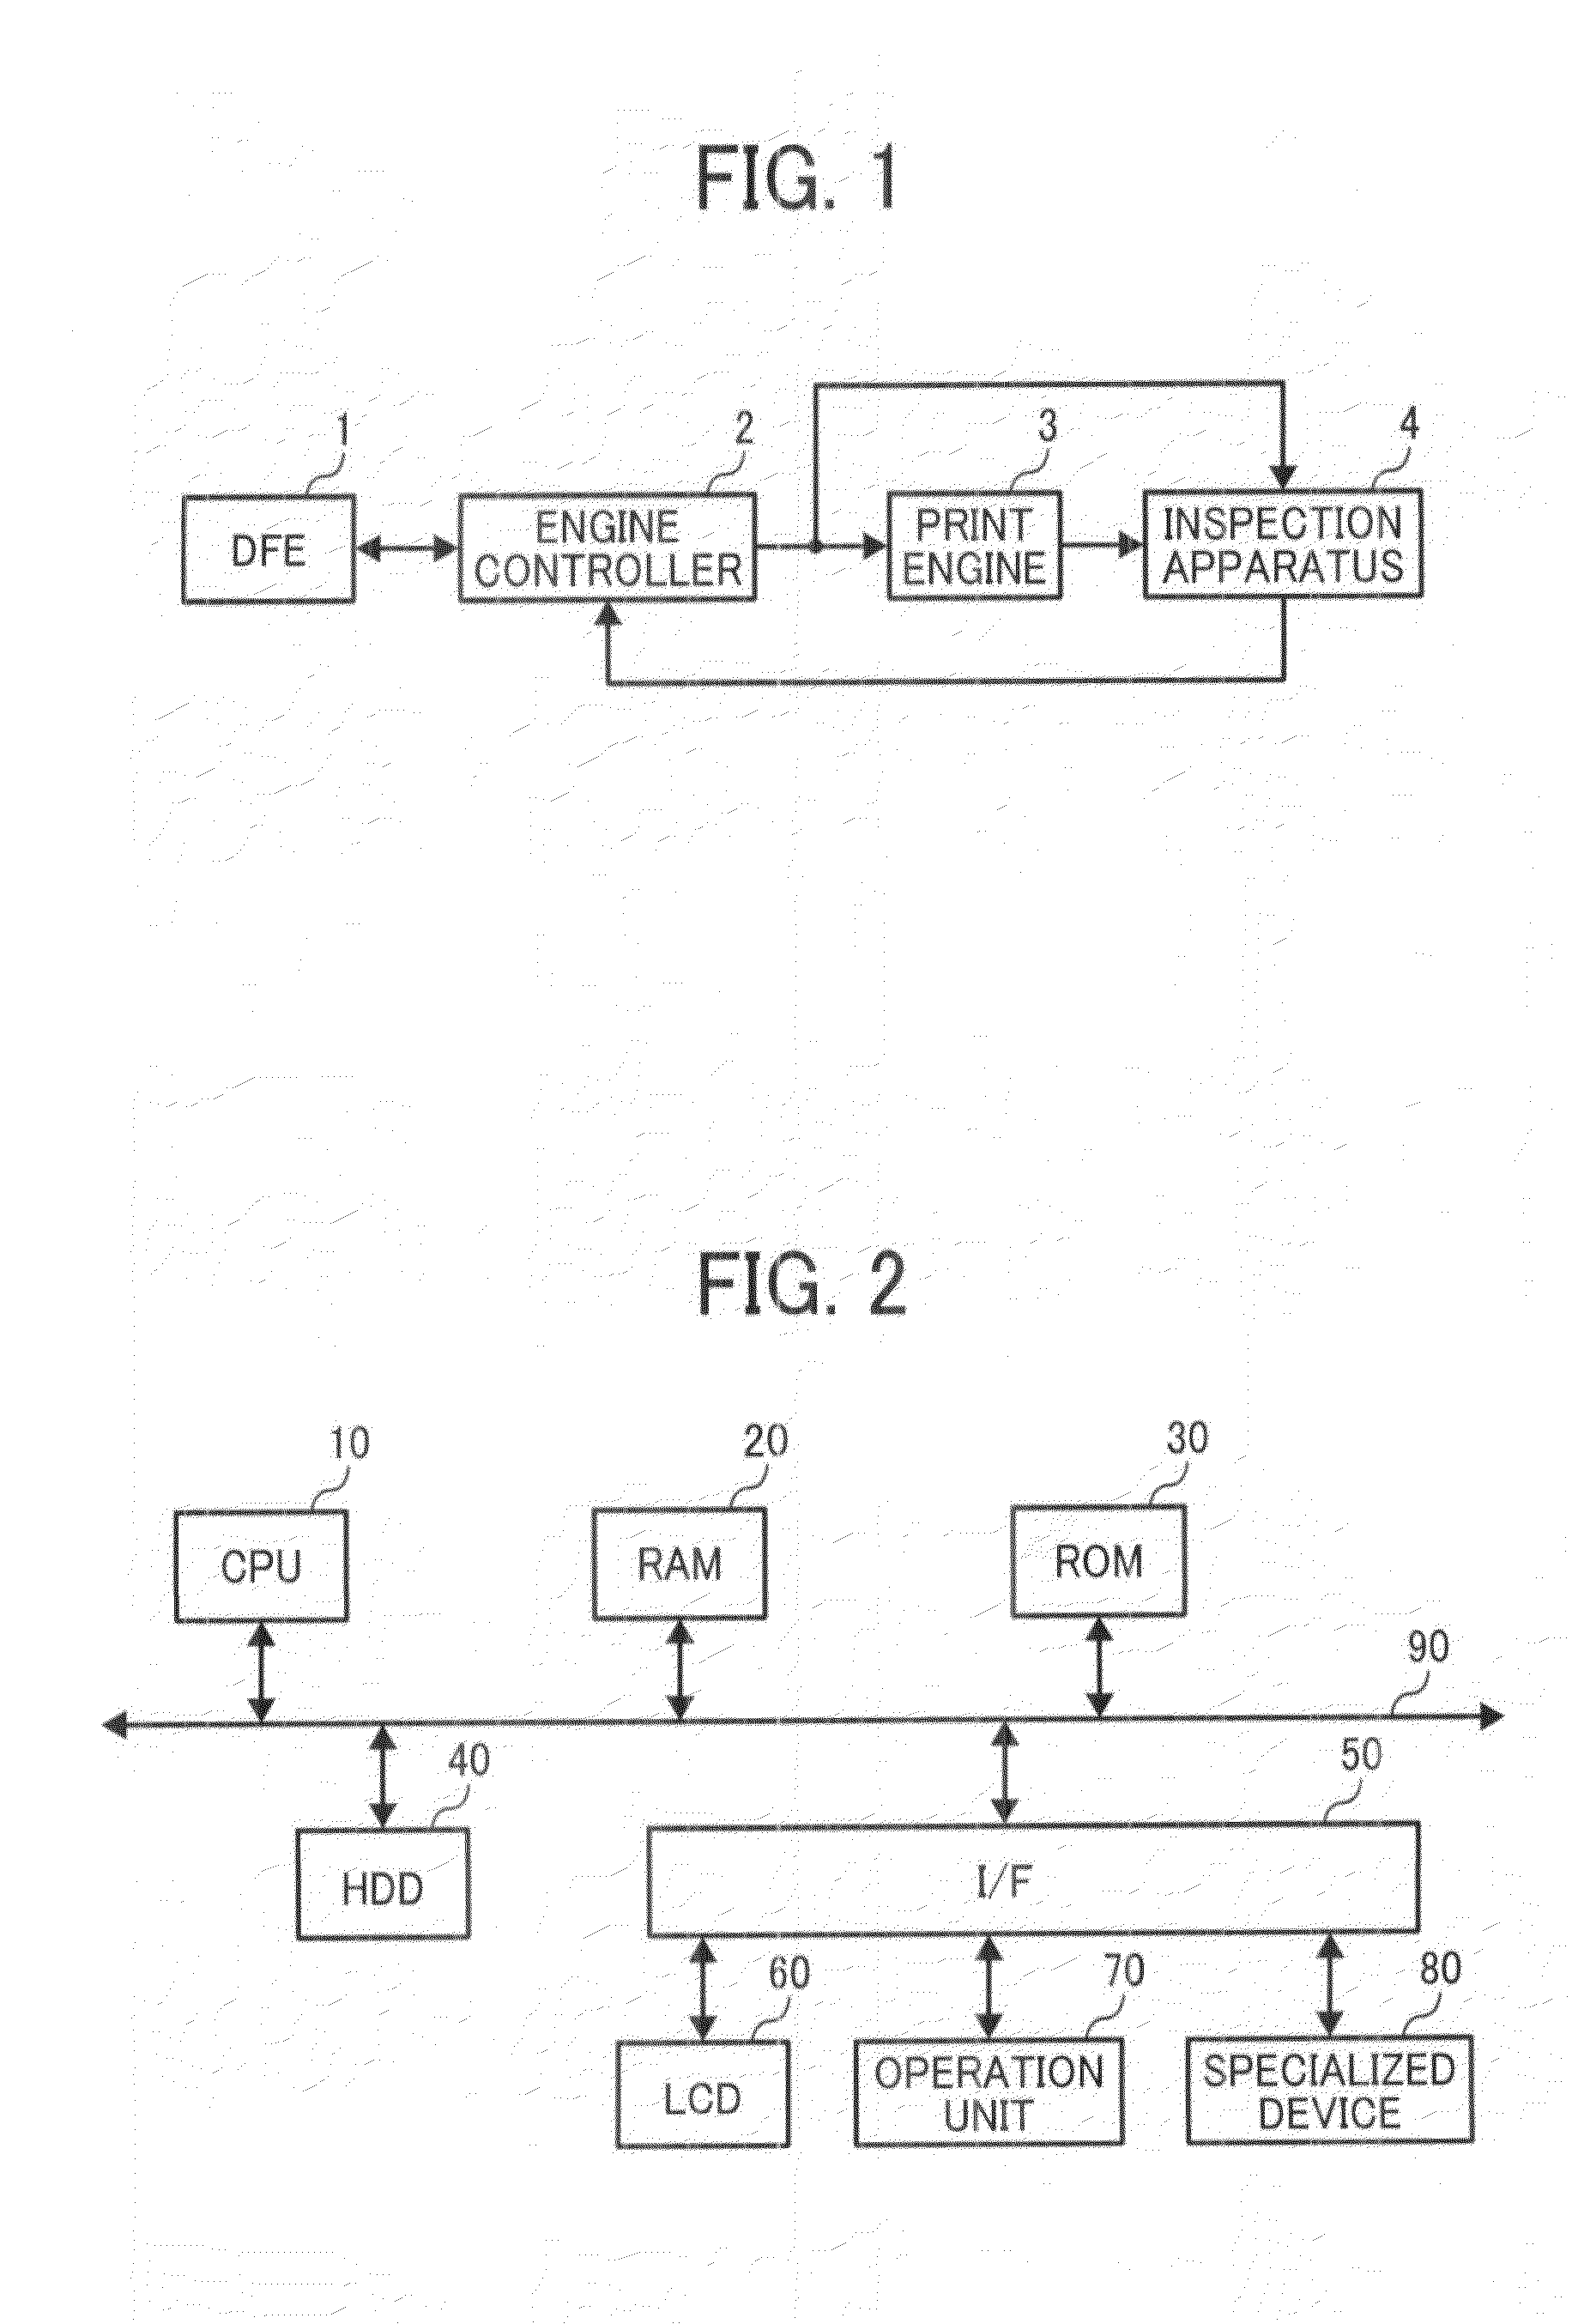 Apparatus, system, and method of inspecting image, and computer-readable medium storing image inspection control program